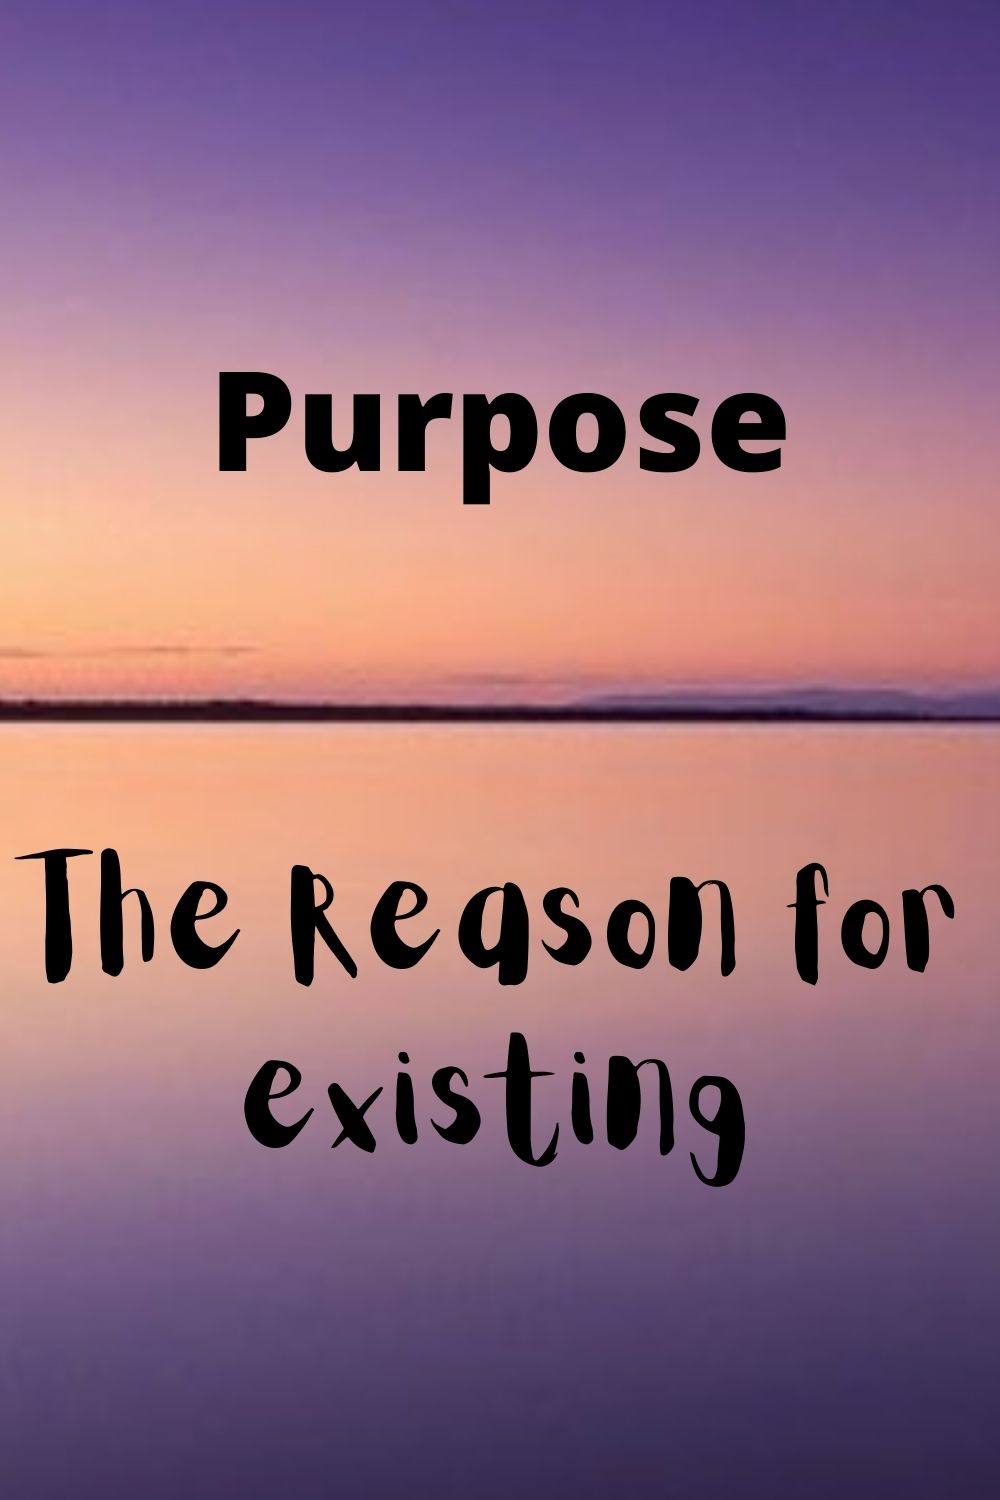 Purpose The Reason for existing